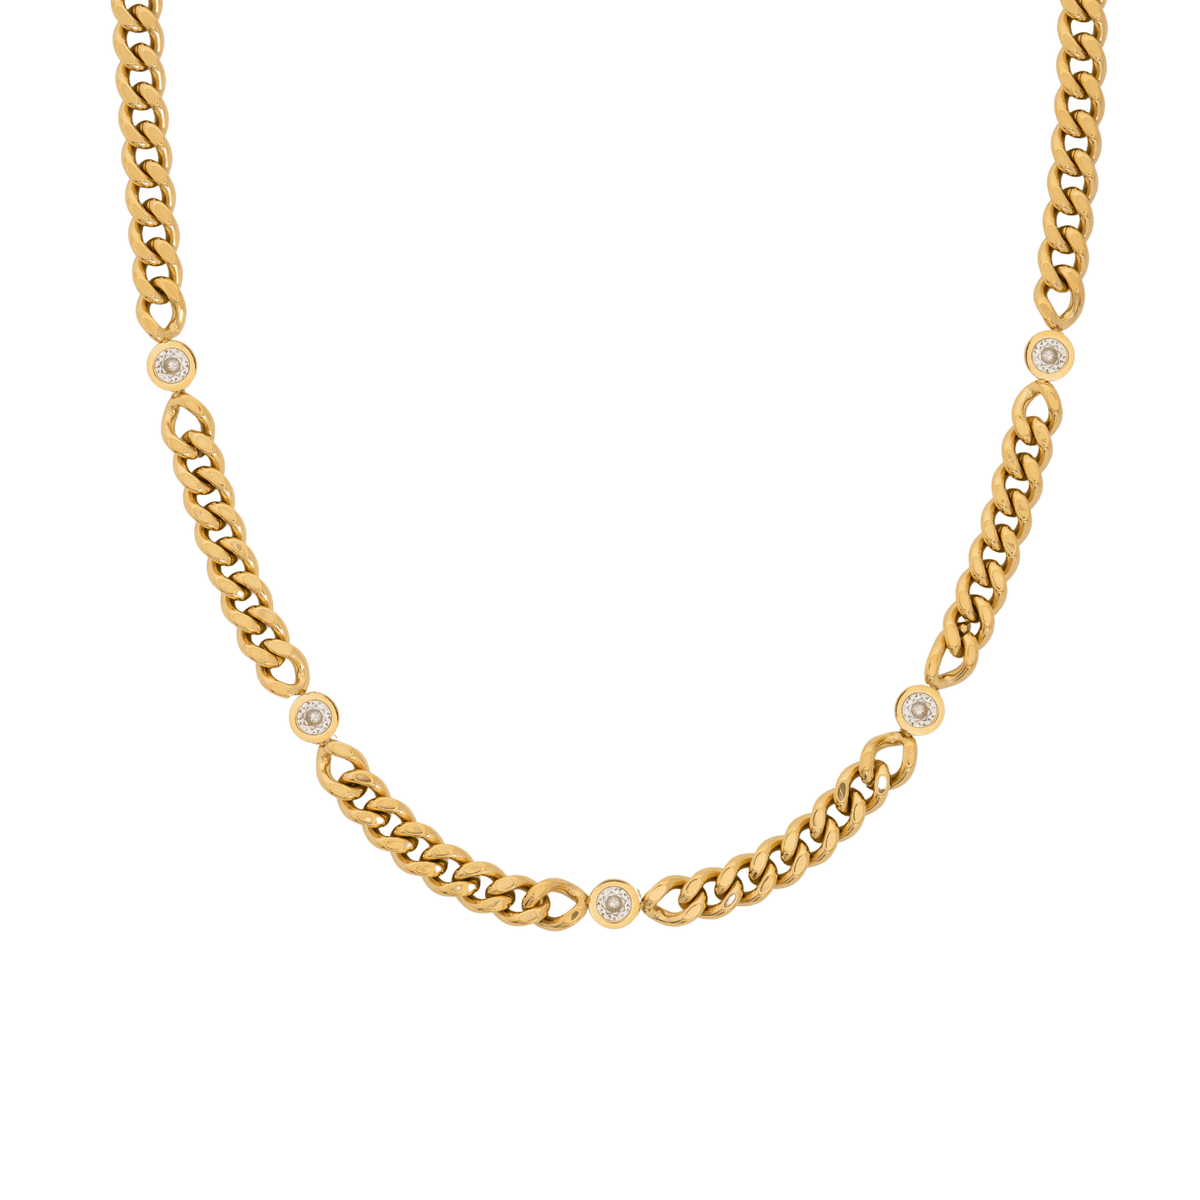 BohoMoon Stainless Steel Amante Necklace Gold